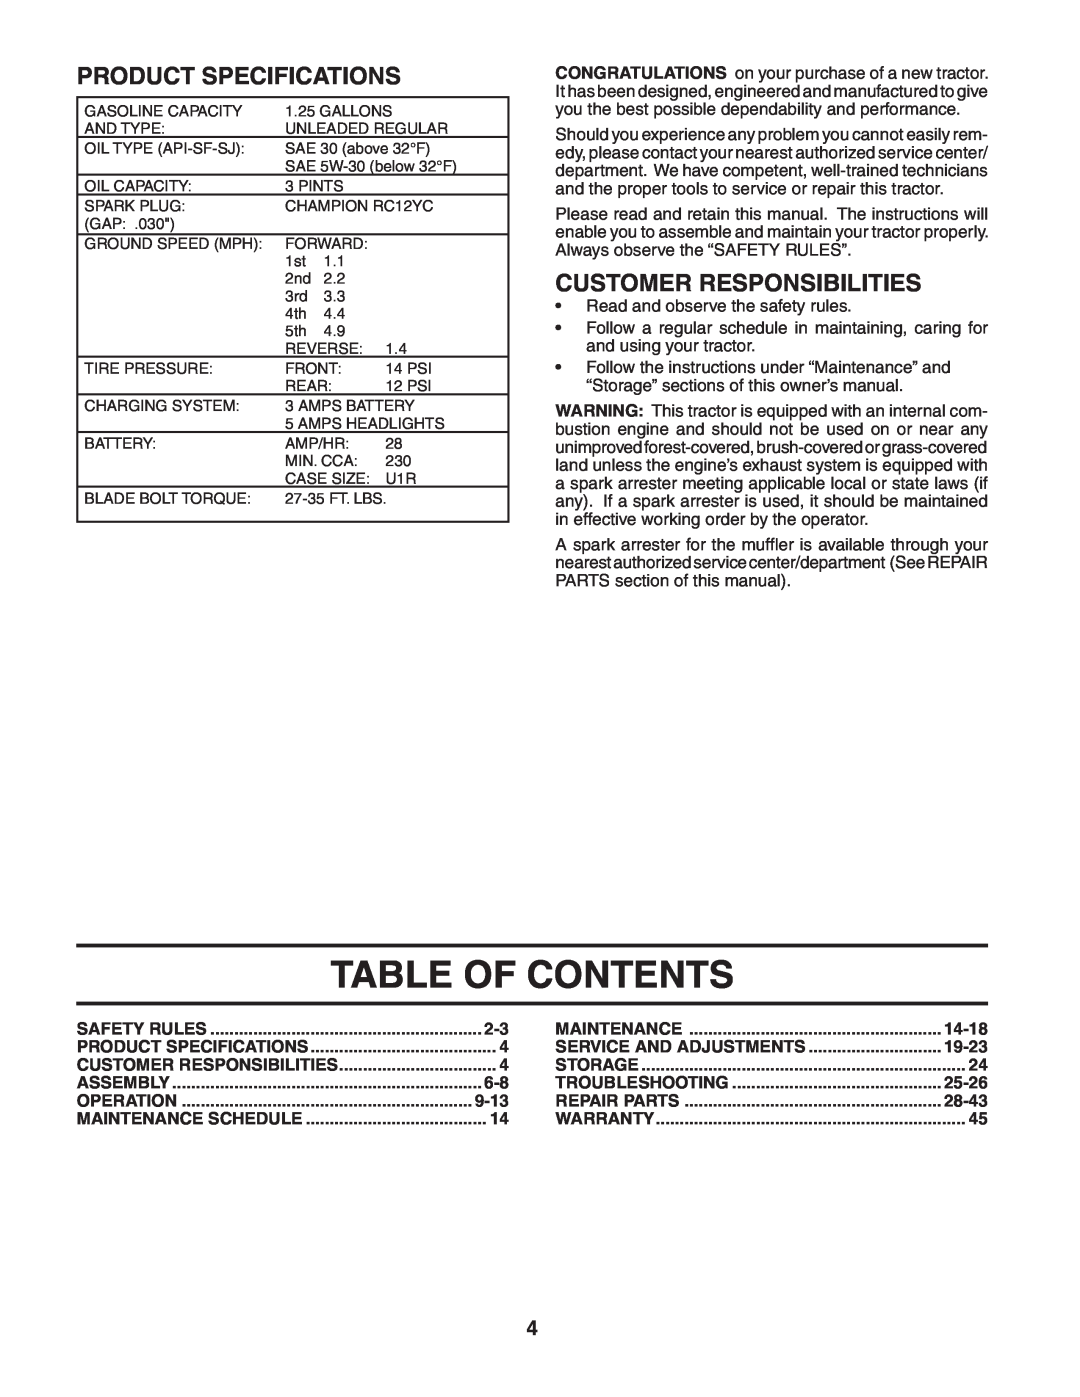 Poulan 183981 manual Table Of Contents, Product Specifications, Customer Responsibilities 